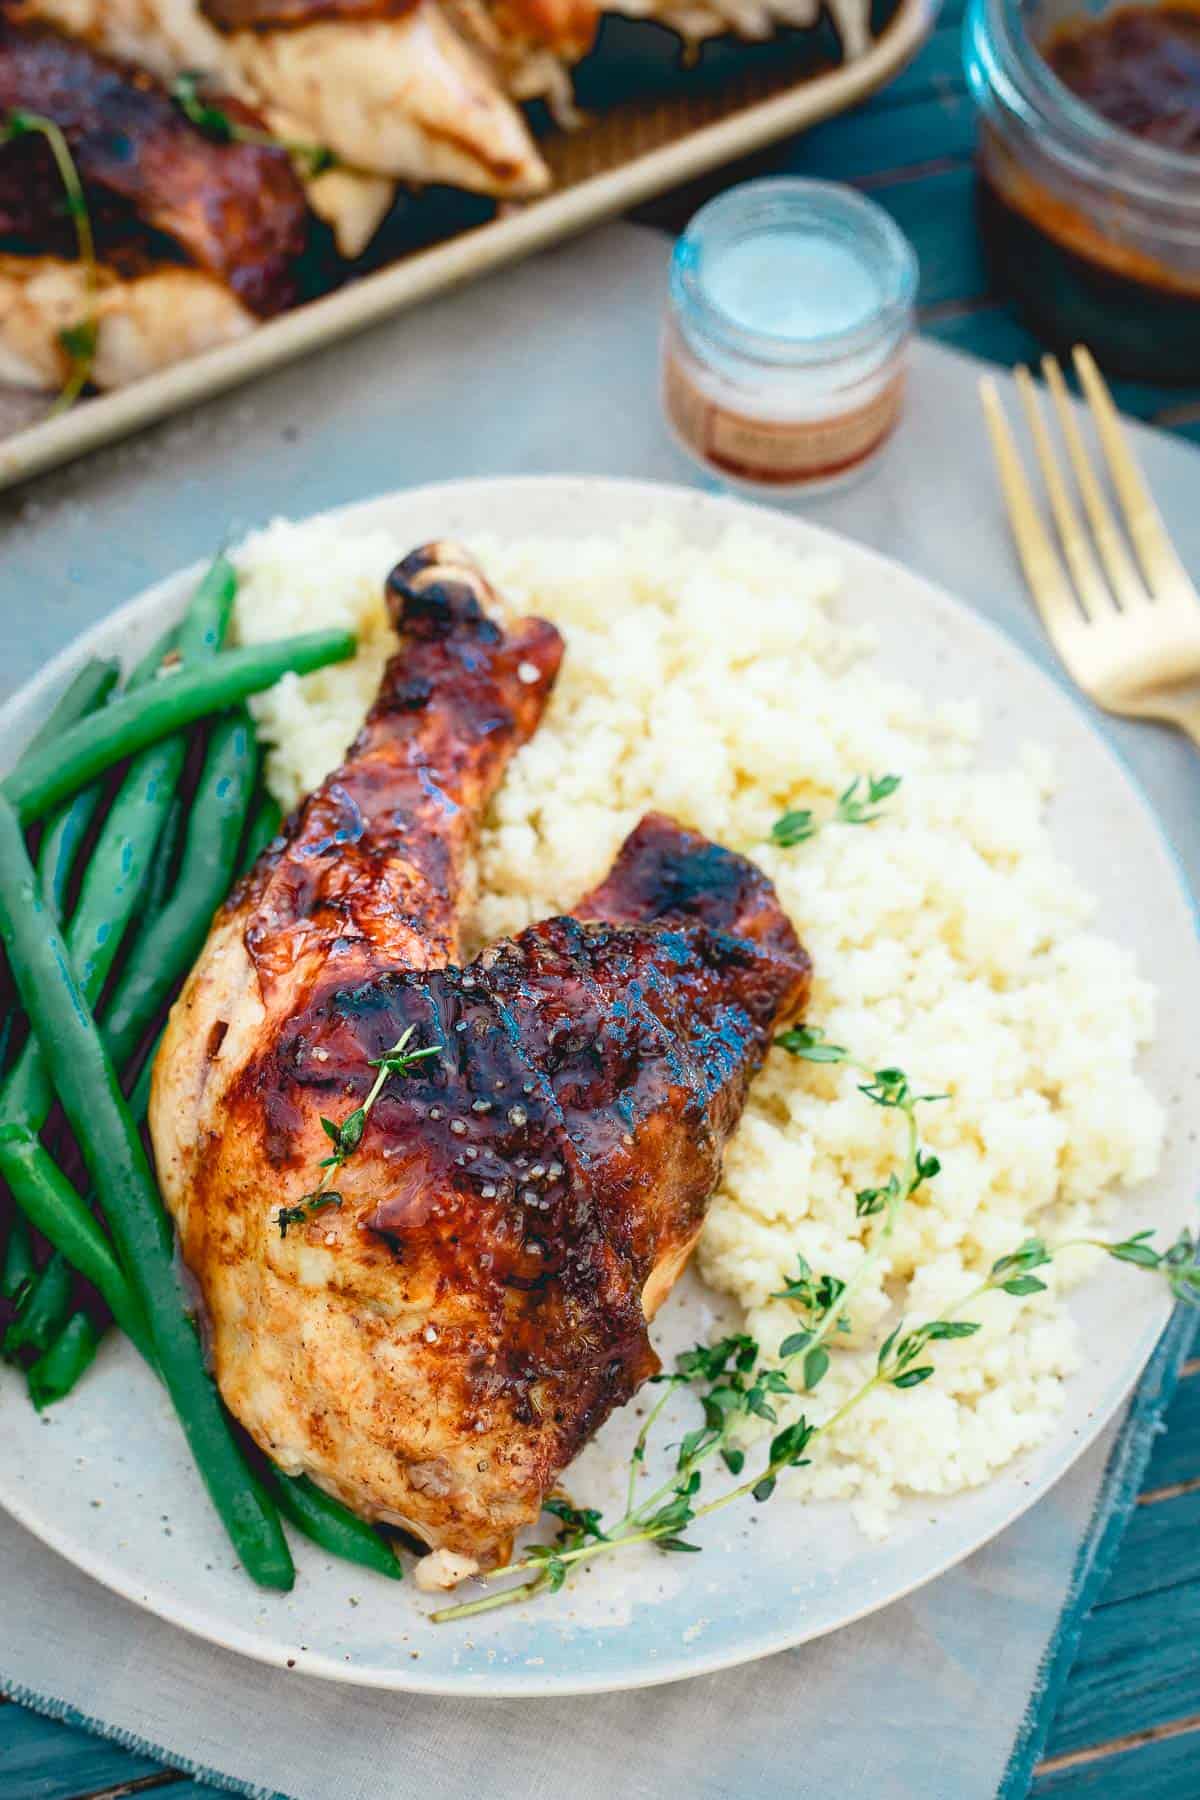 Apple butter glazed roasted chicken makes a great show-stopper for a weekend dinner at home.